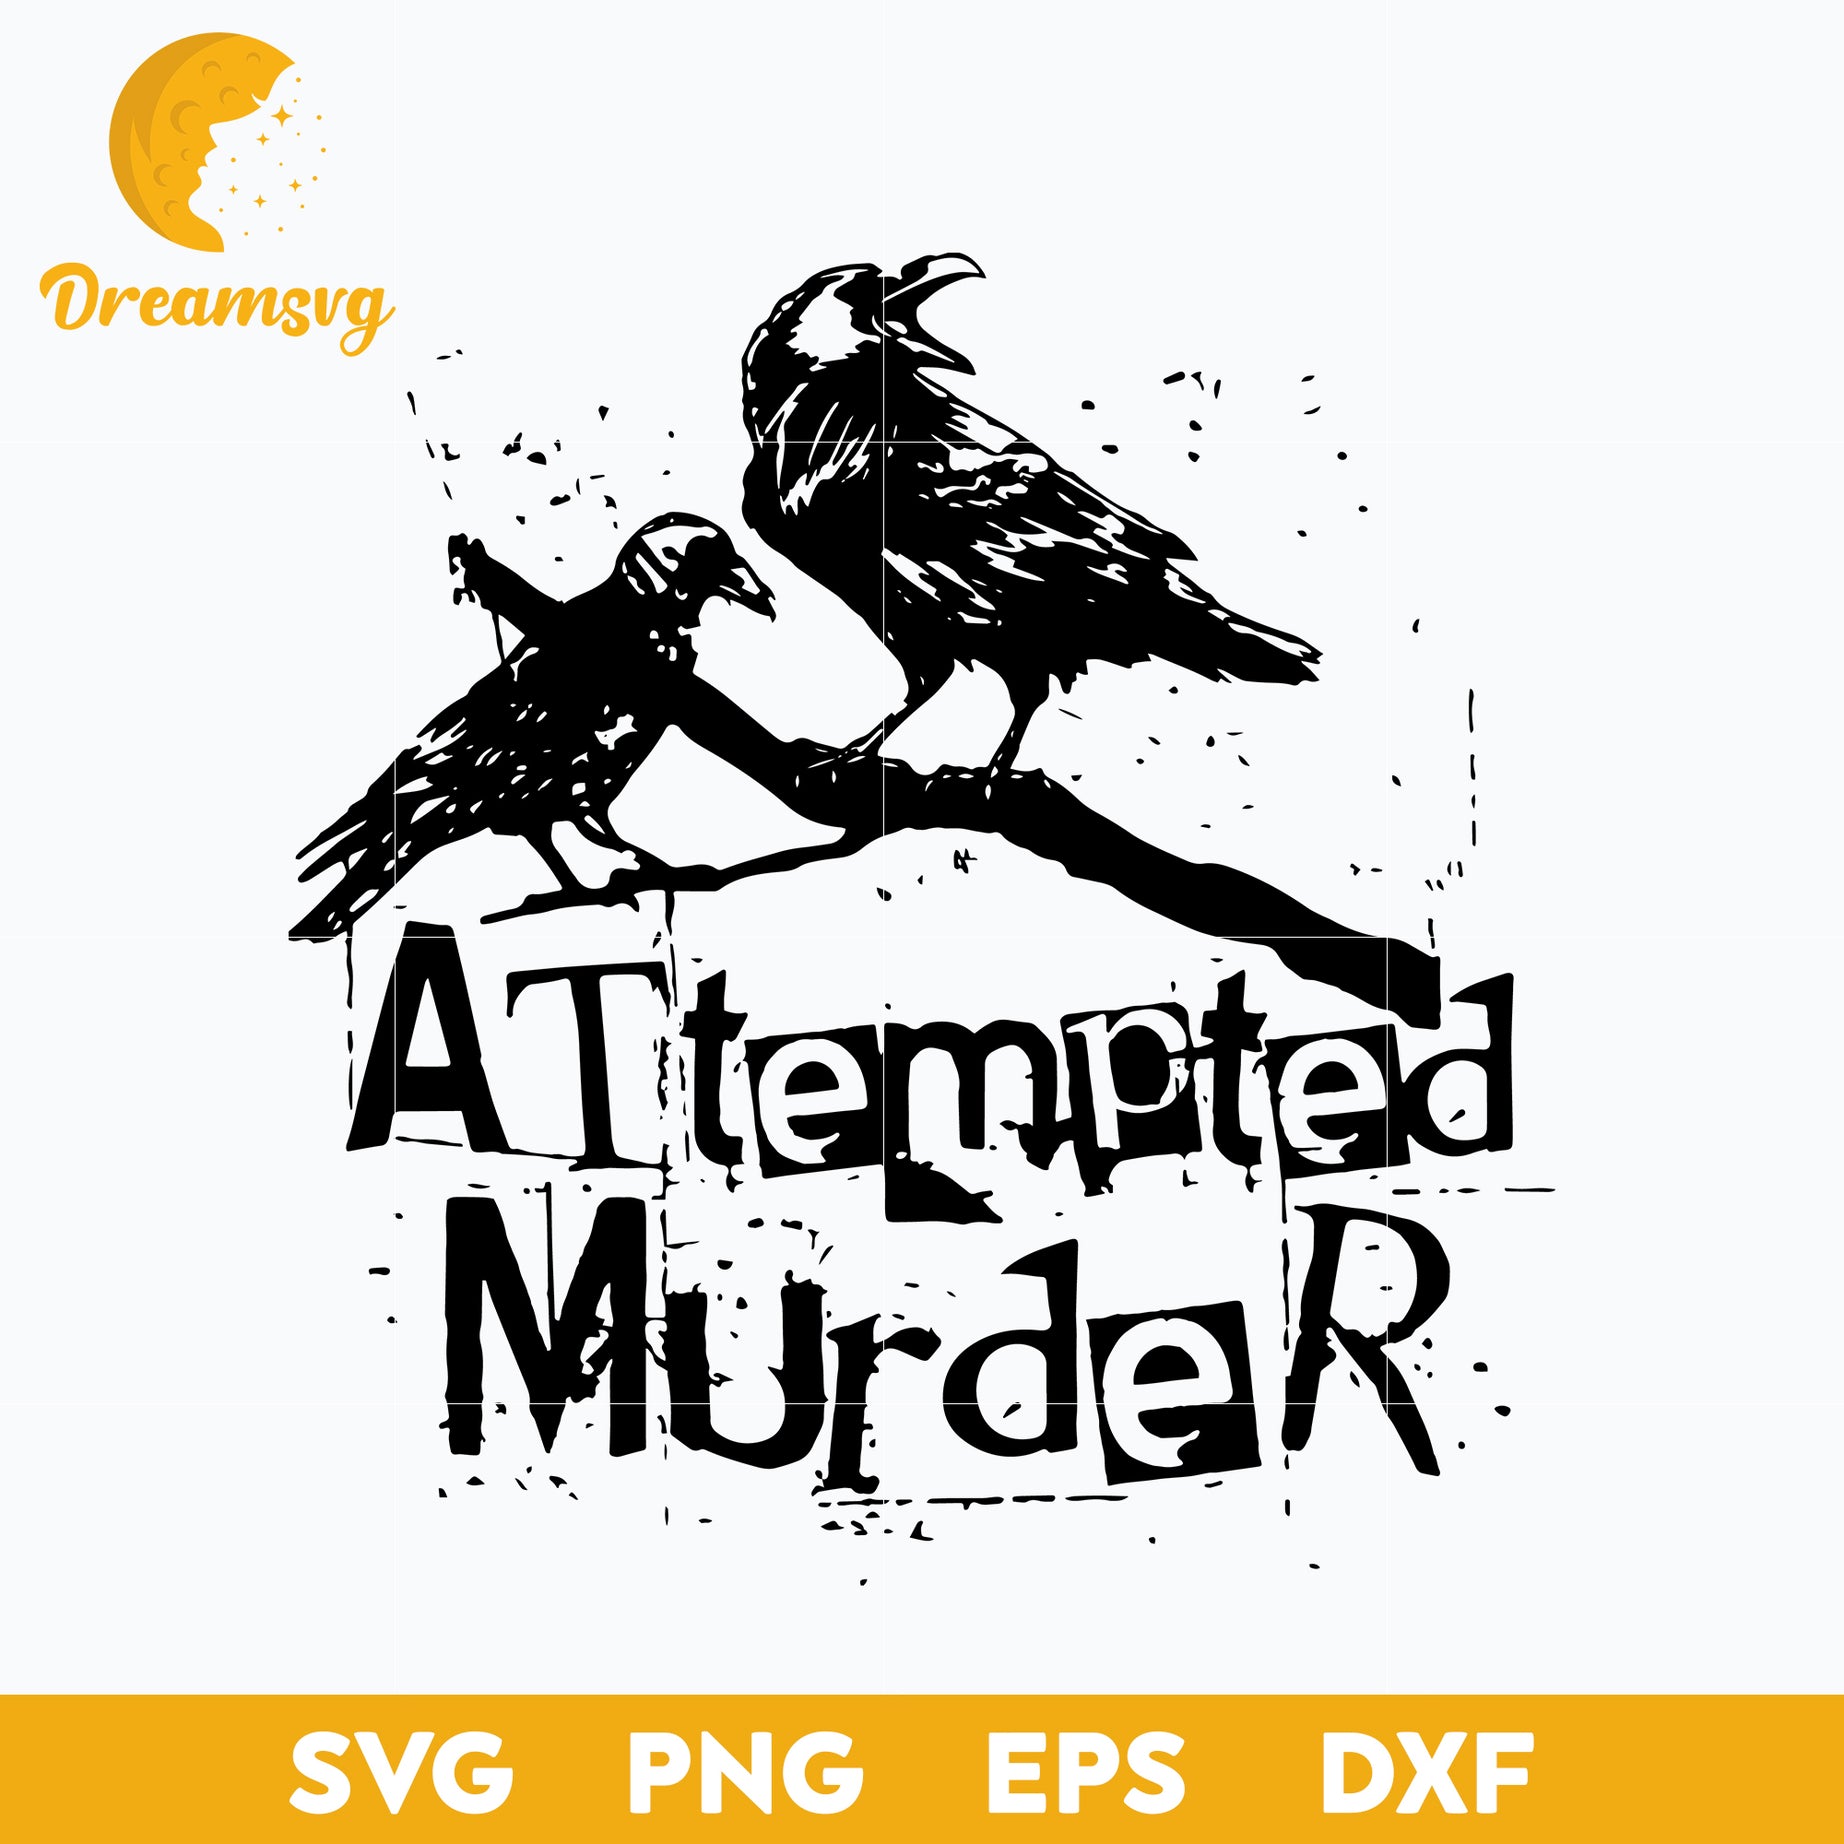 Attempted Murder Crows Collective Noun Pun Svg, Funny Svg, Png, Dxf, Eps Digital File.